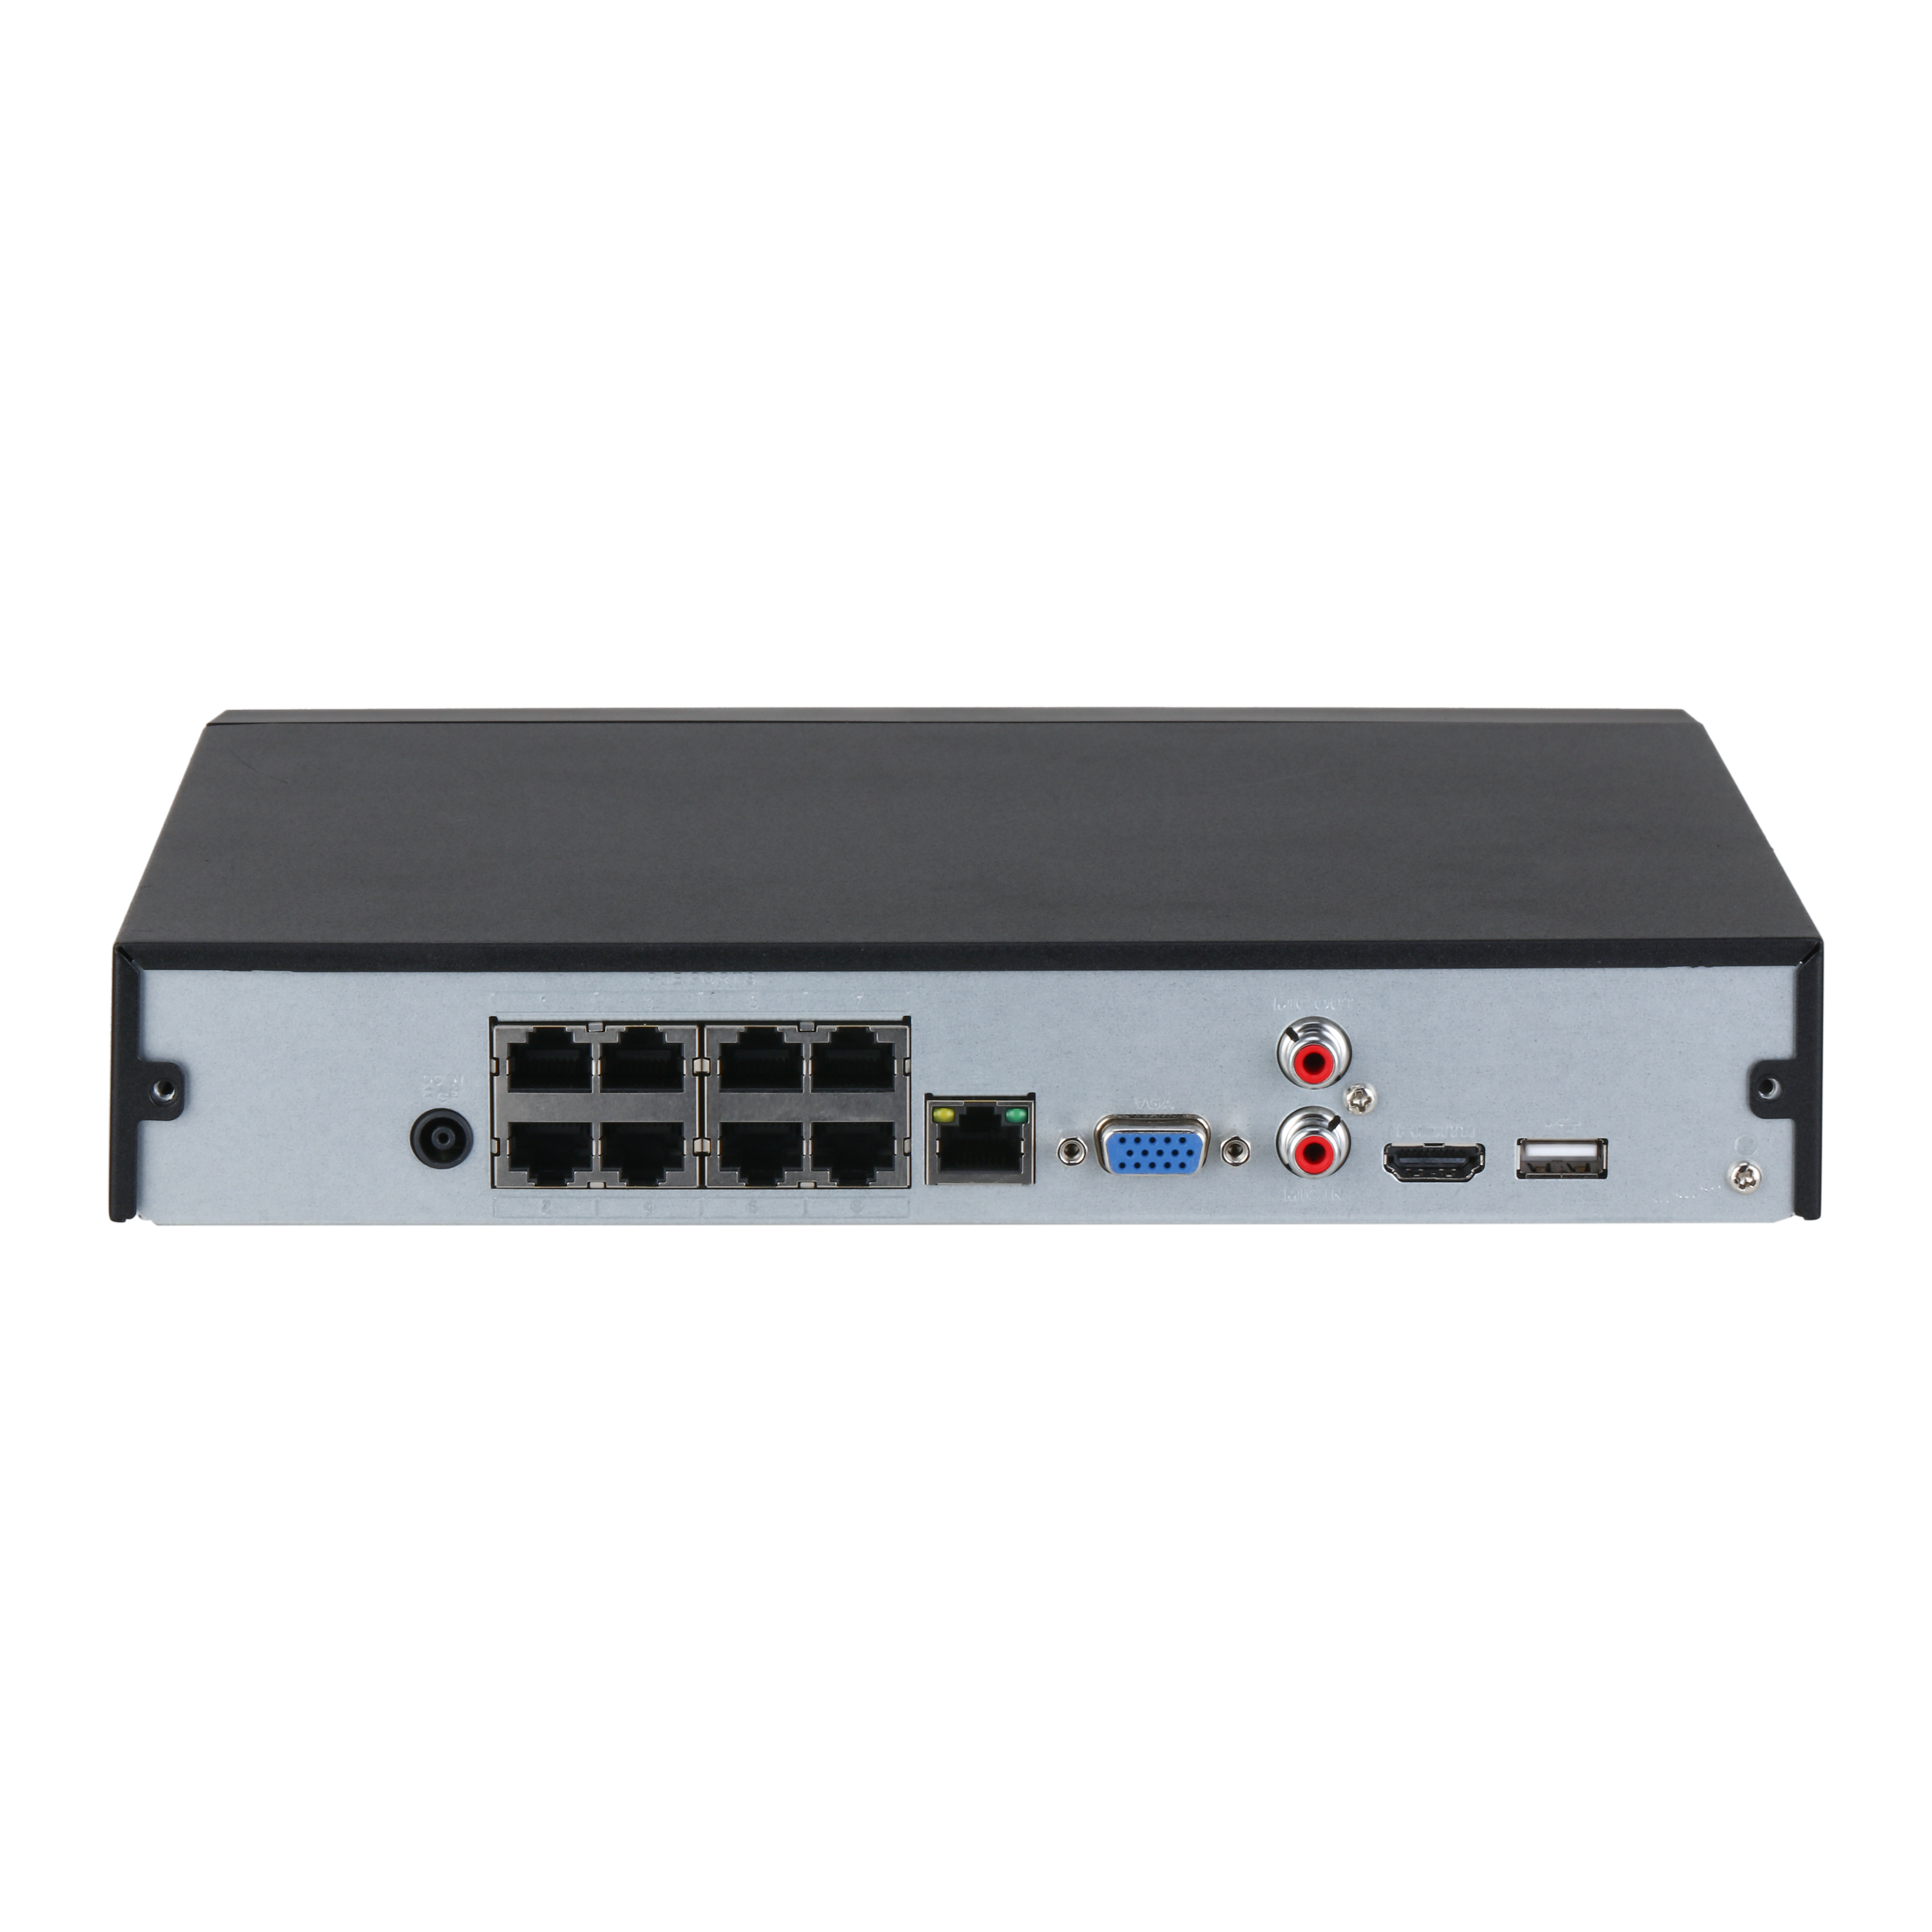 DHI-NVR2108HS-8P-I2 - Dahua - 8 Channel Compact 1U 8PoE 1HDD WizSense Network Video Recorder